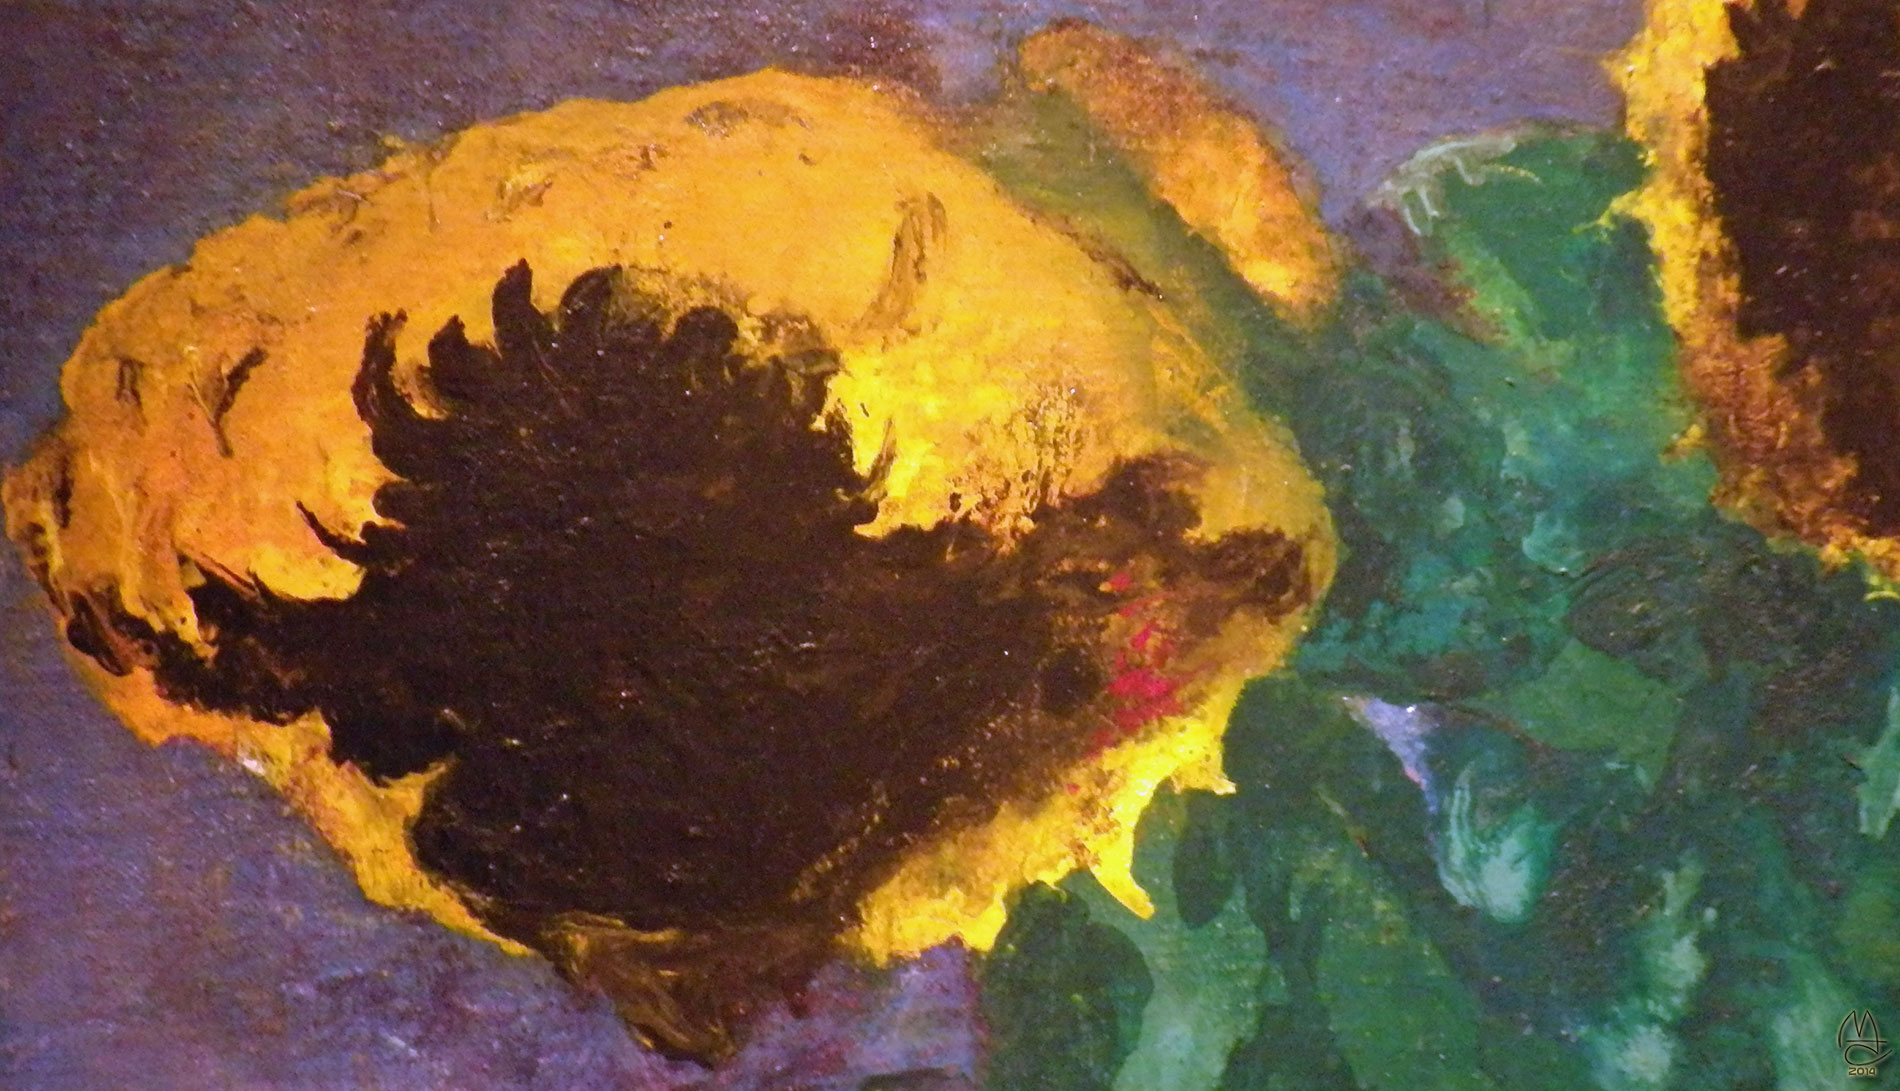 Sunflowers by Emil Nolde 1932